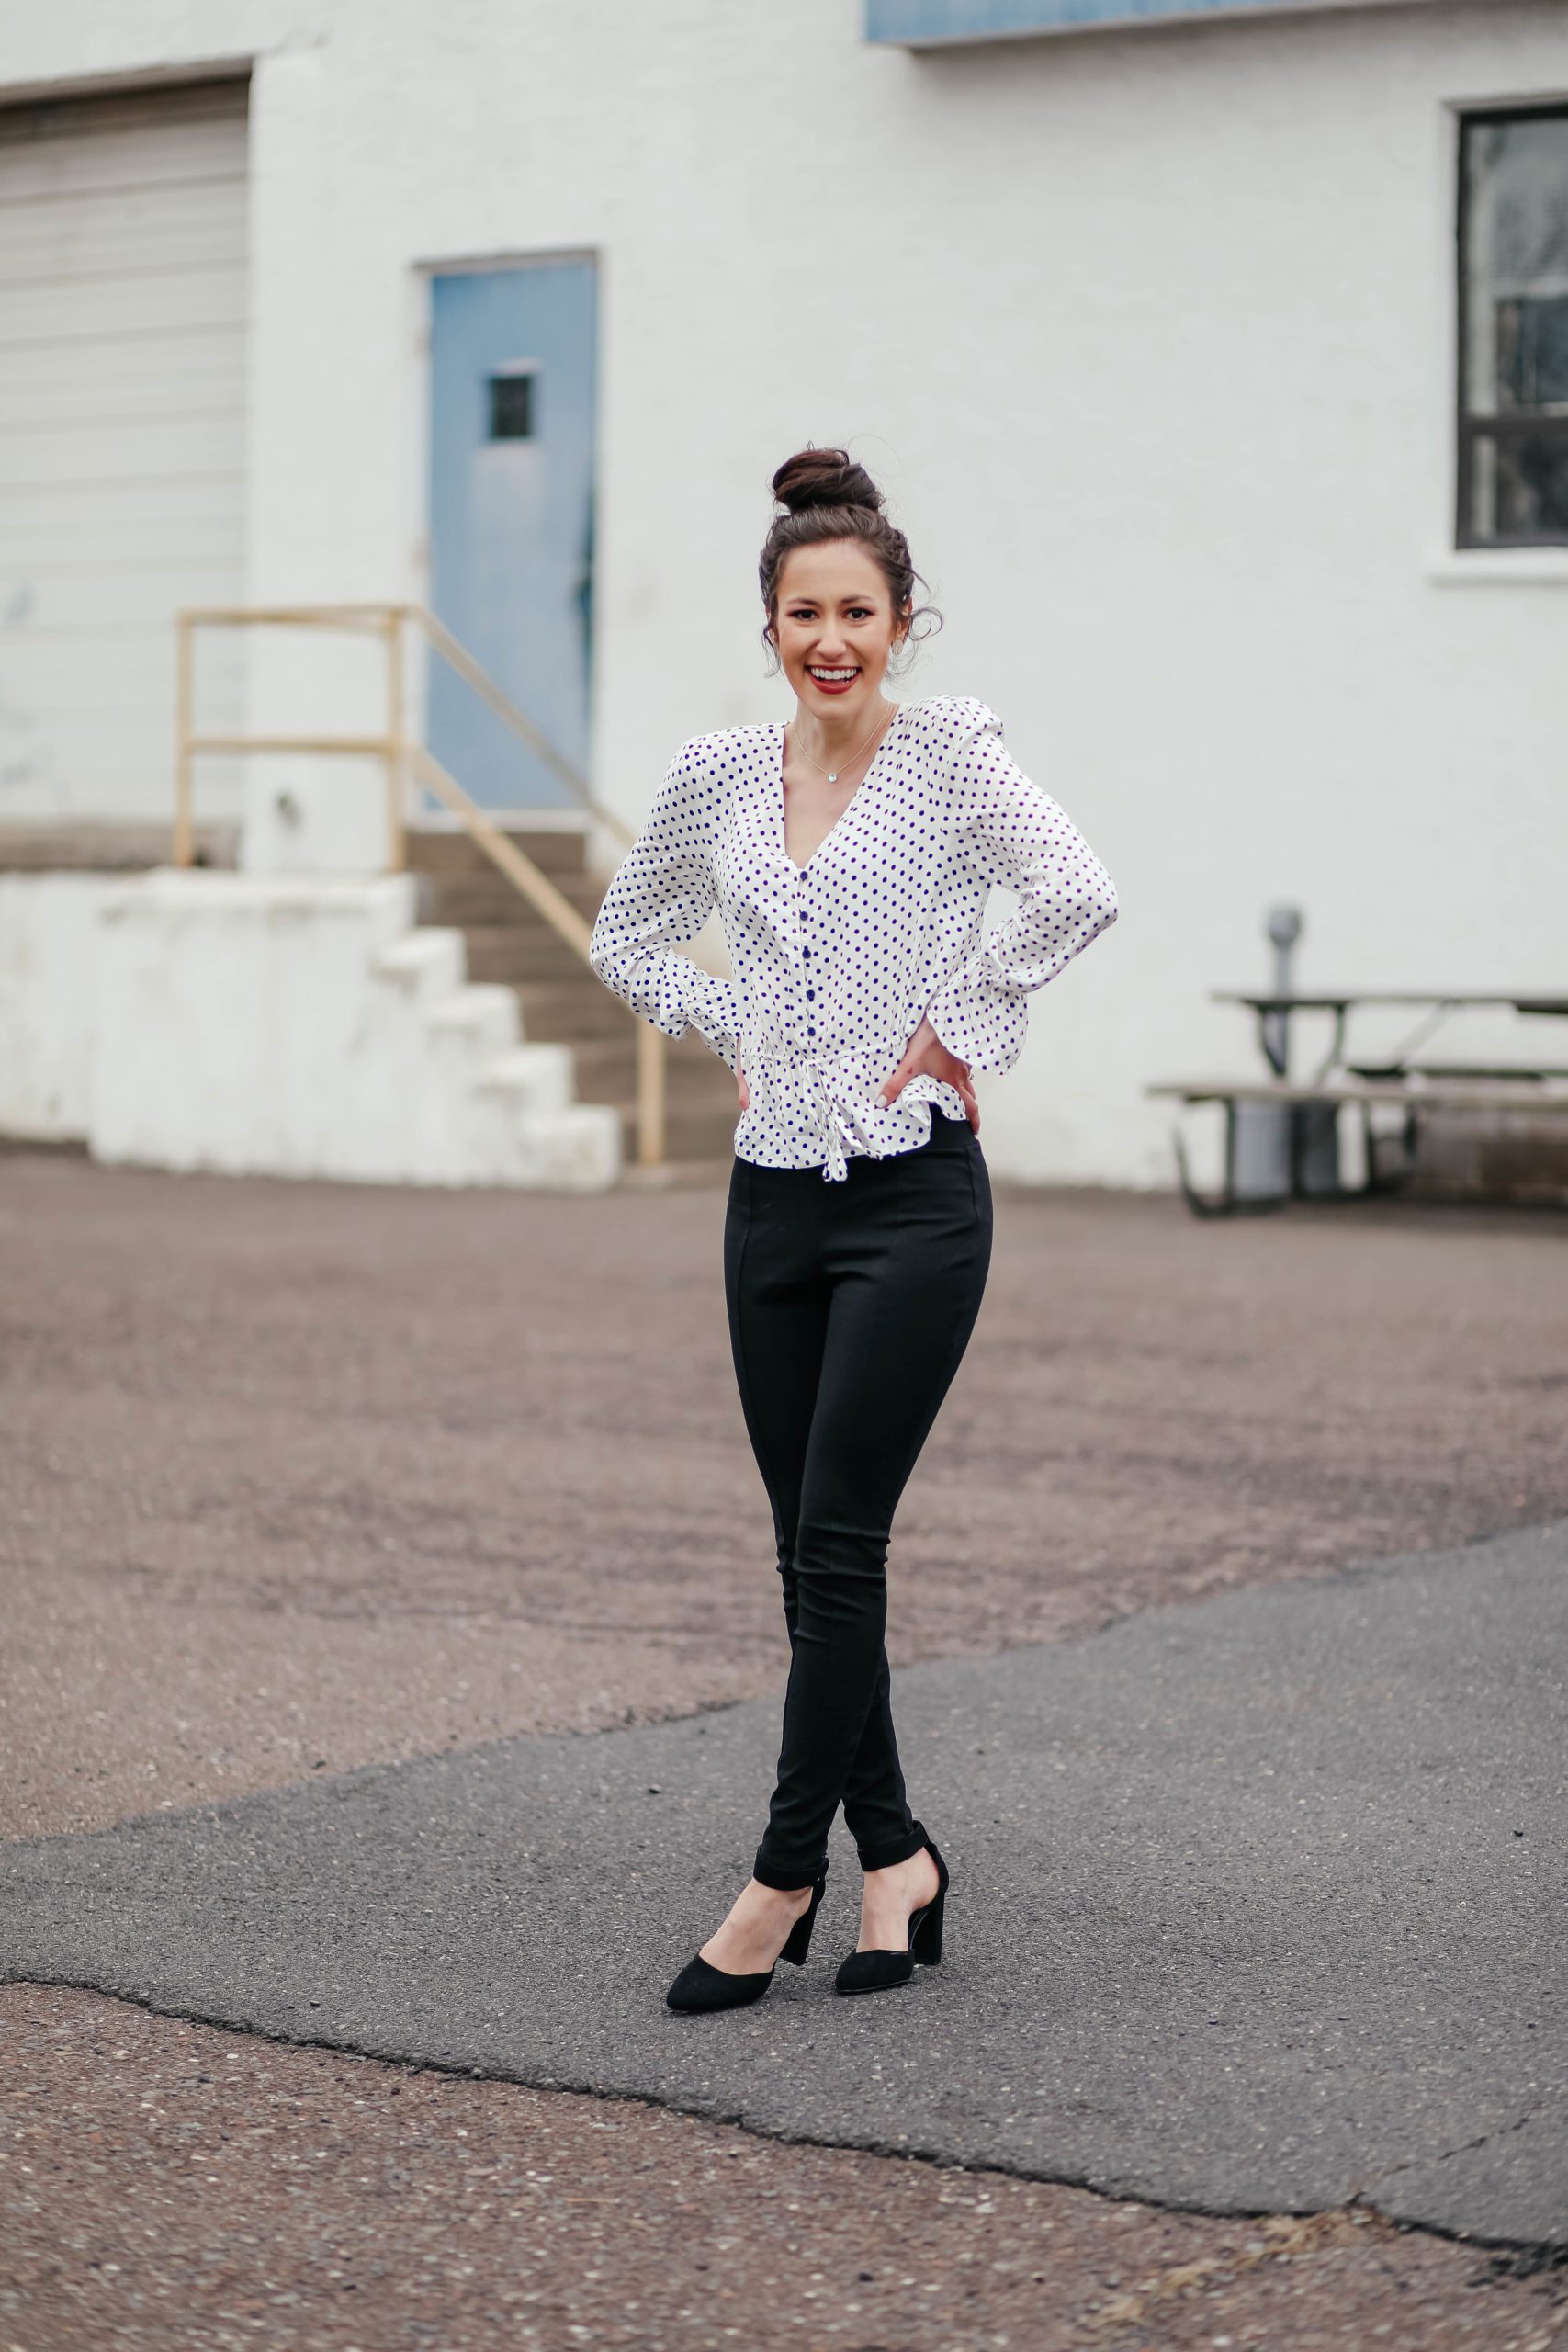 From Desk to Drinks: Polka Dot Blouse + Ponte Pants - Affordable Workwear on Coming Up Roses (UNDER $30 OUTFIT!!!)